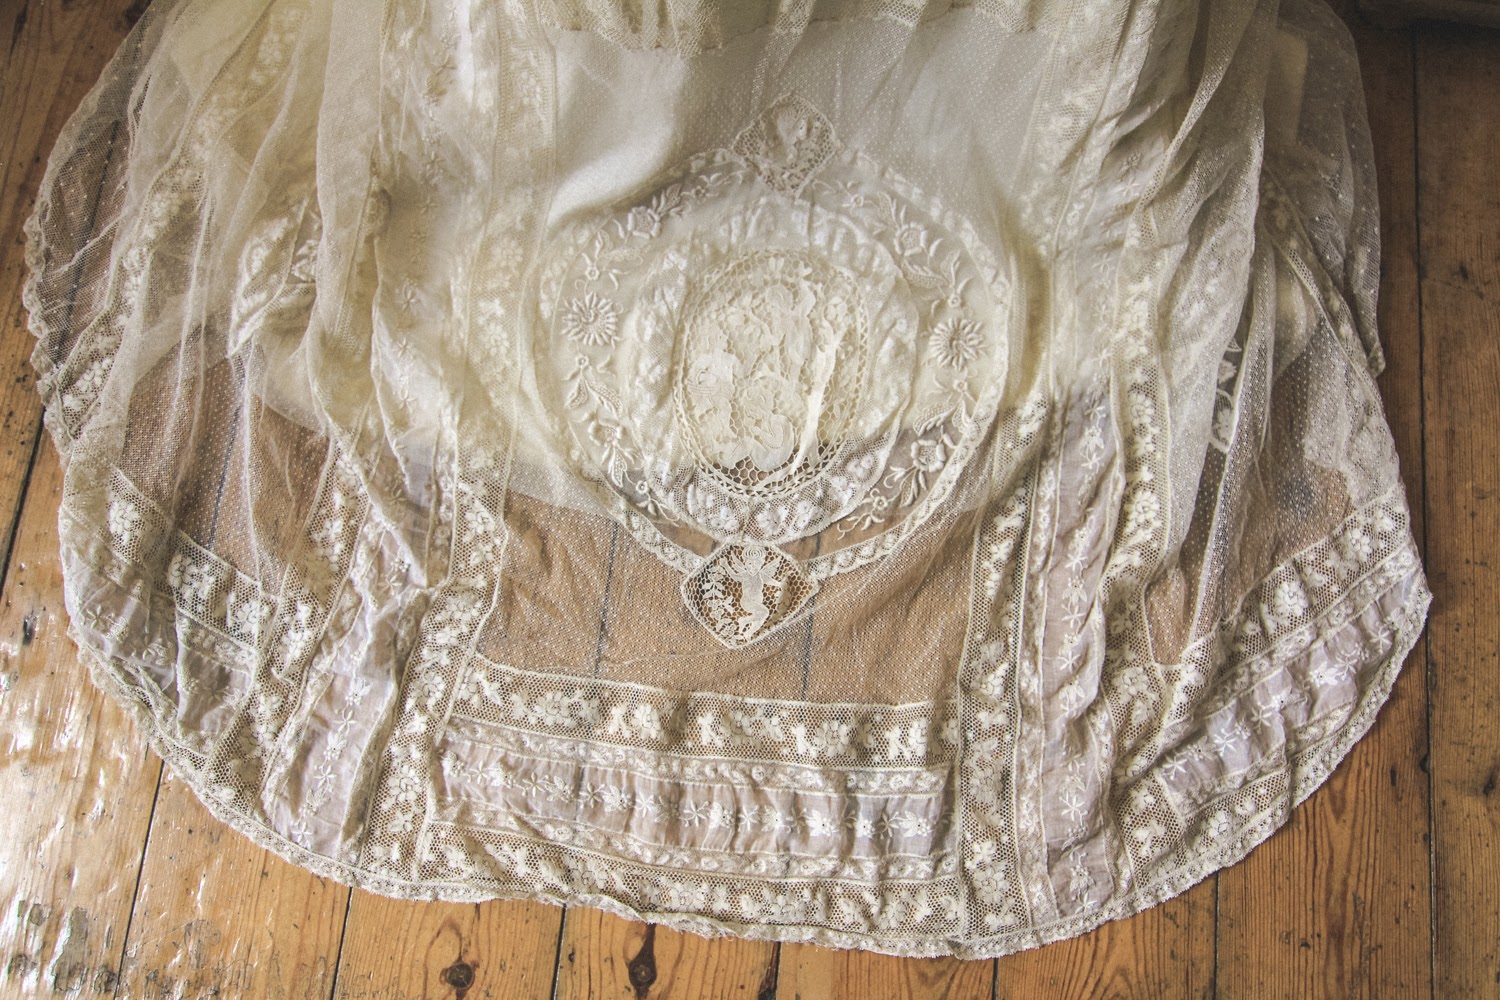 The train of my antique lace wedding dress 